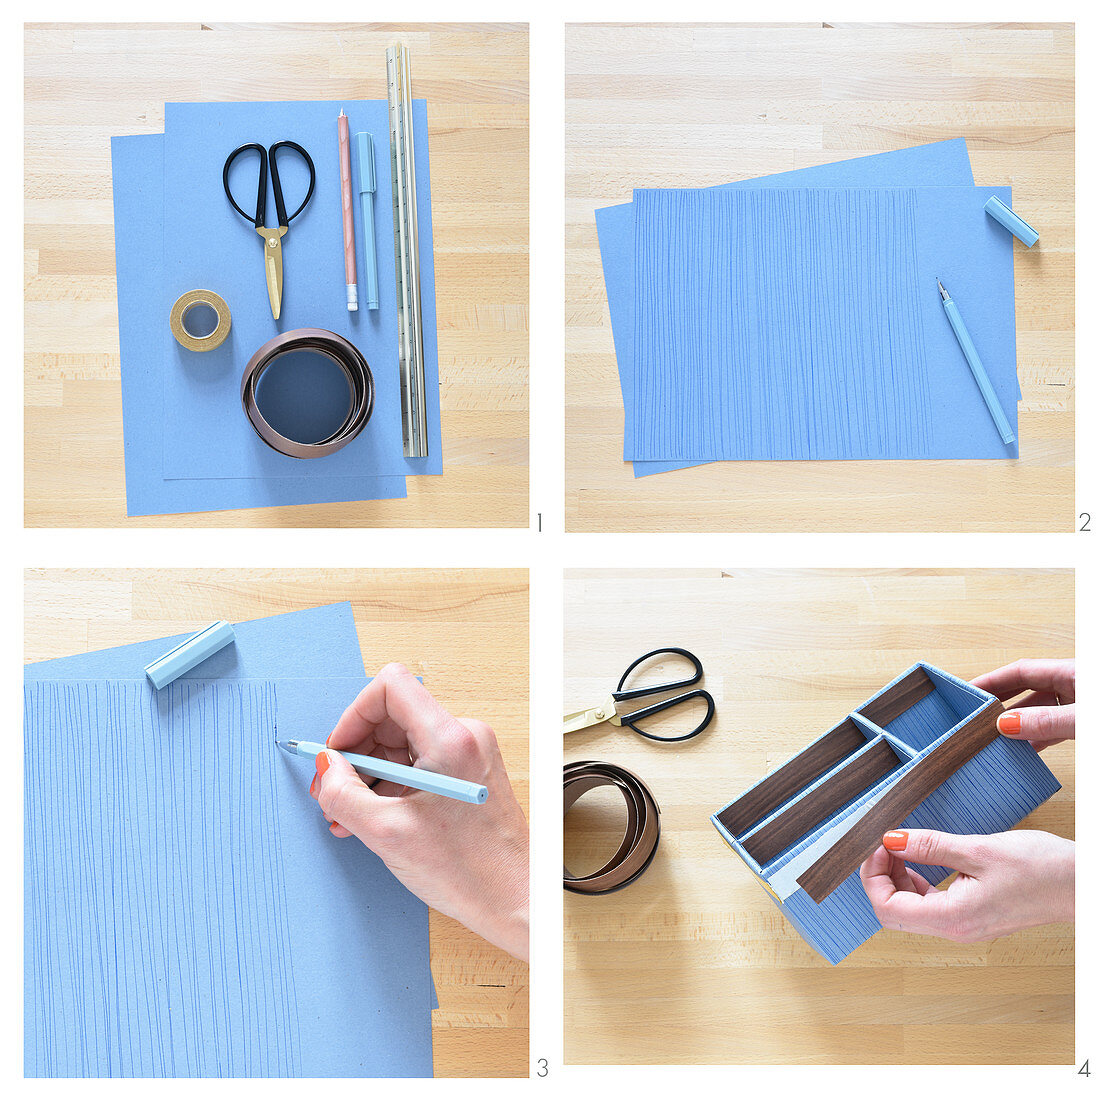 Instructions for making a desk organiser decorated with edging strip